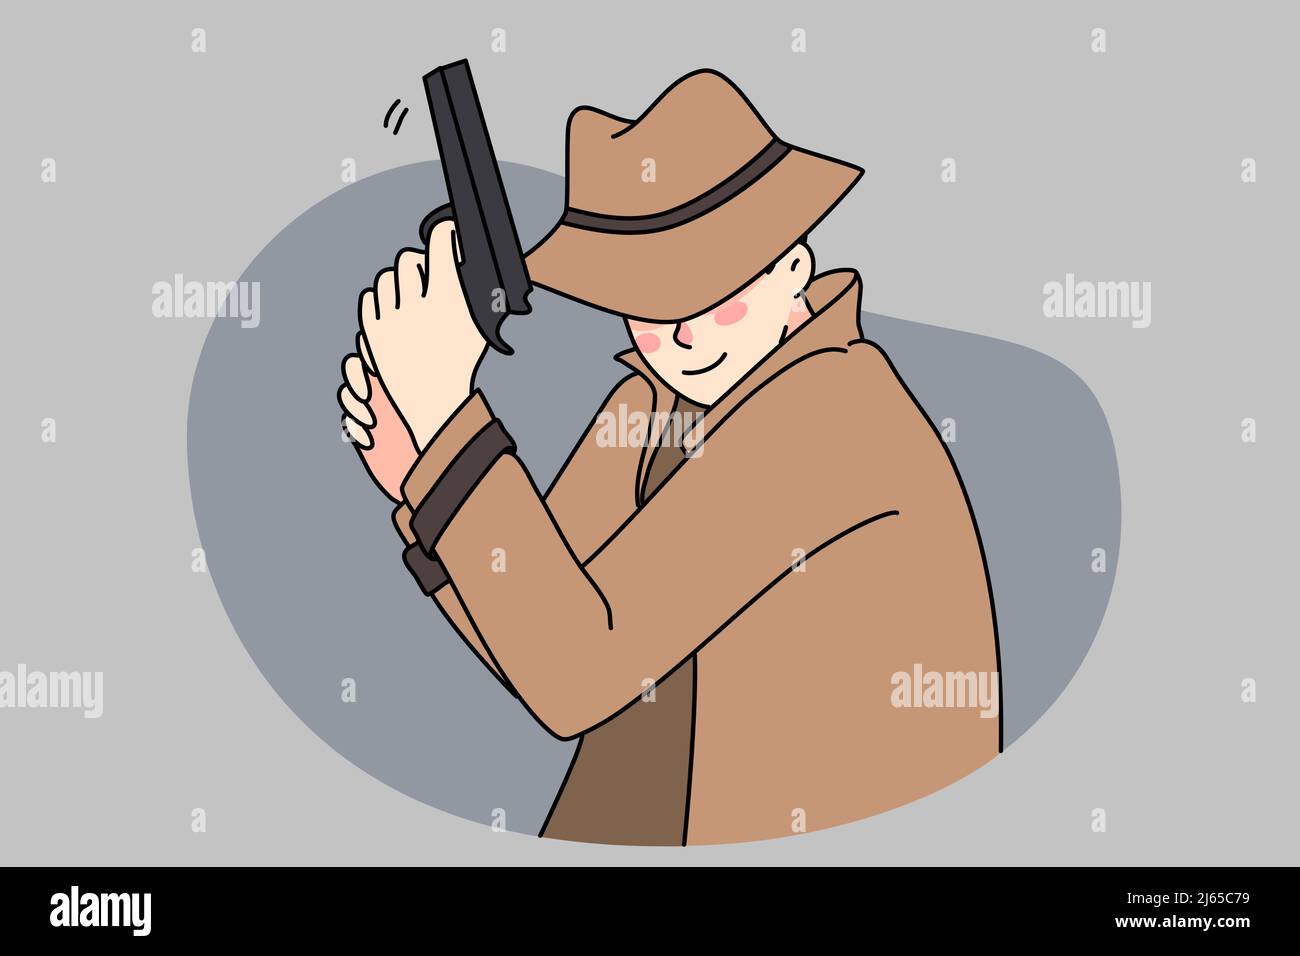 Male detective in coat and hat holding gun spying for criminal or suspect. Man spy or police officer undercover pursue offender with firearm. Private agent work. Vector illustration.  Stock Vector